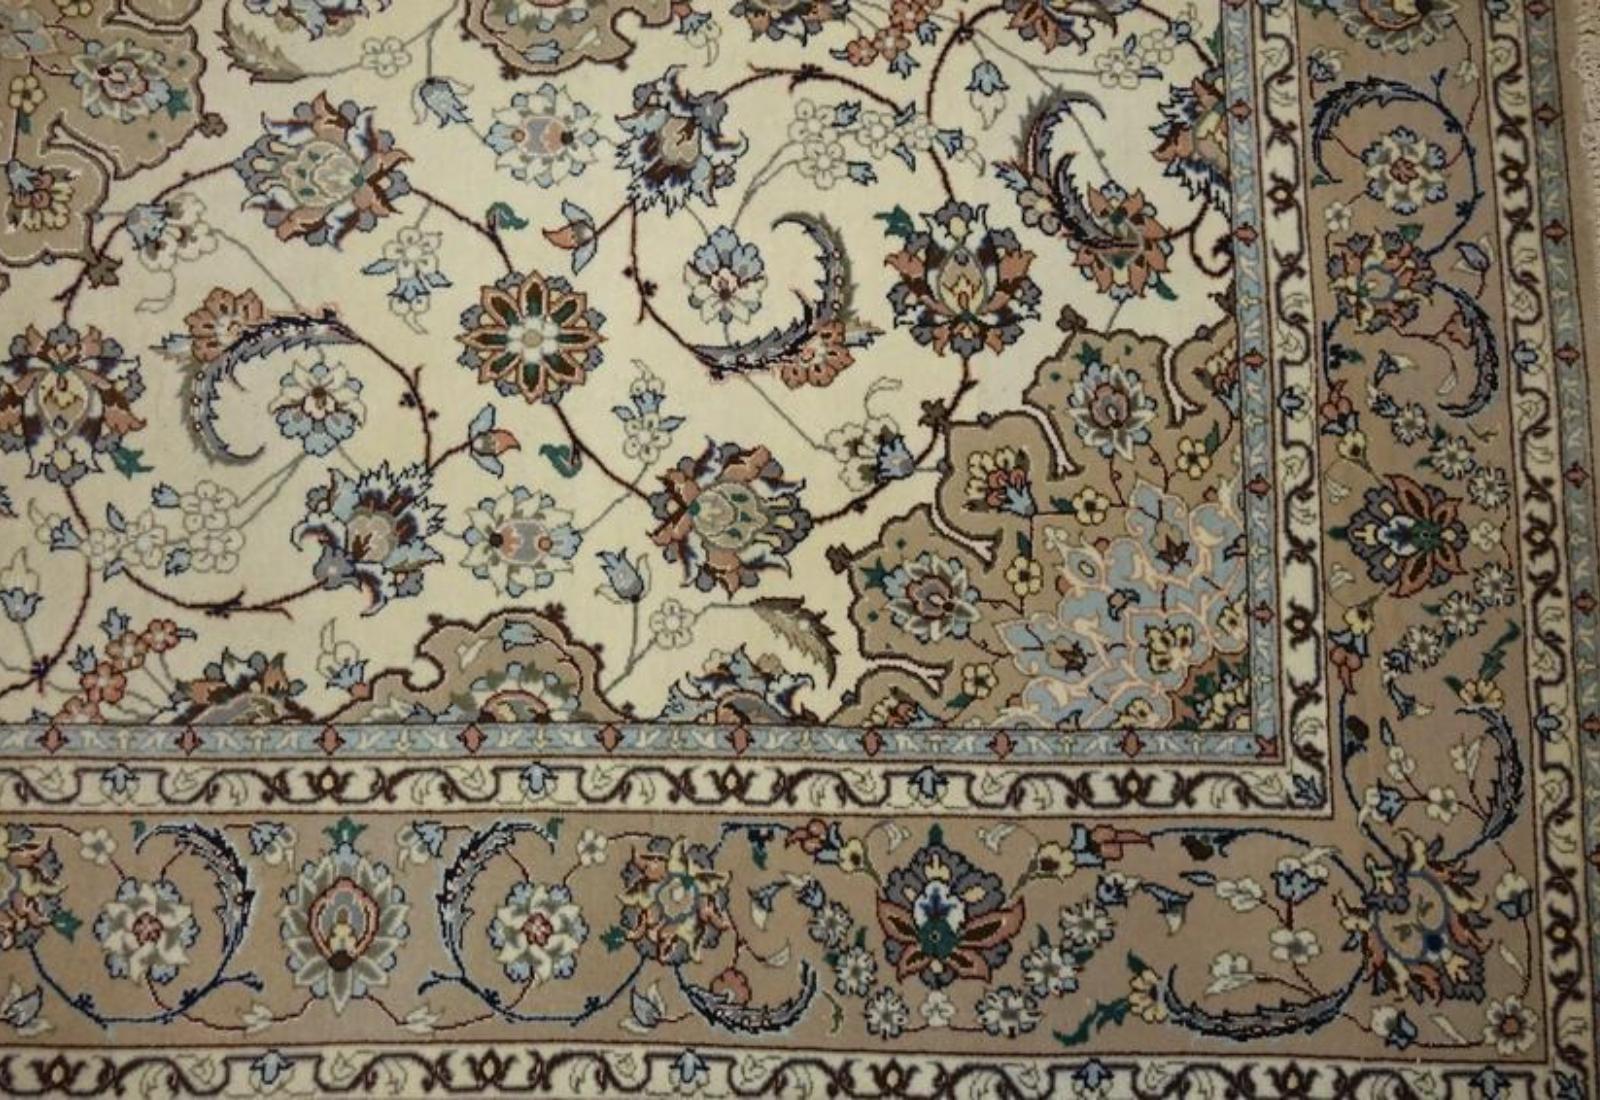 Very fine Persian Isfahan Silk & Wool - 5' 8' In Good Condition For Sale In Newmanstown, PA